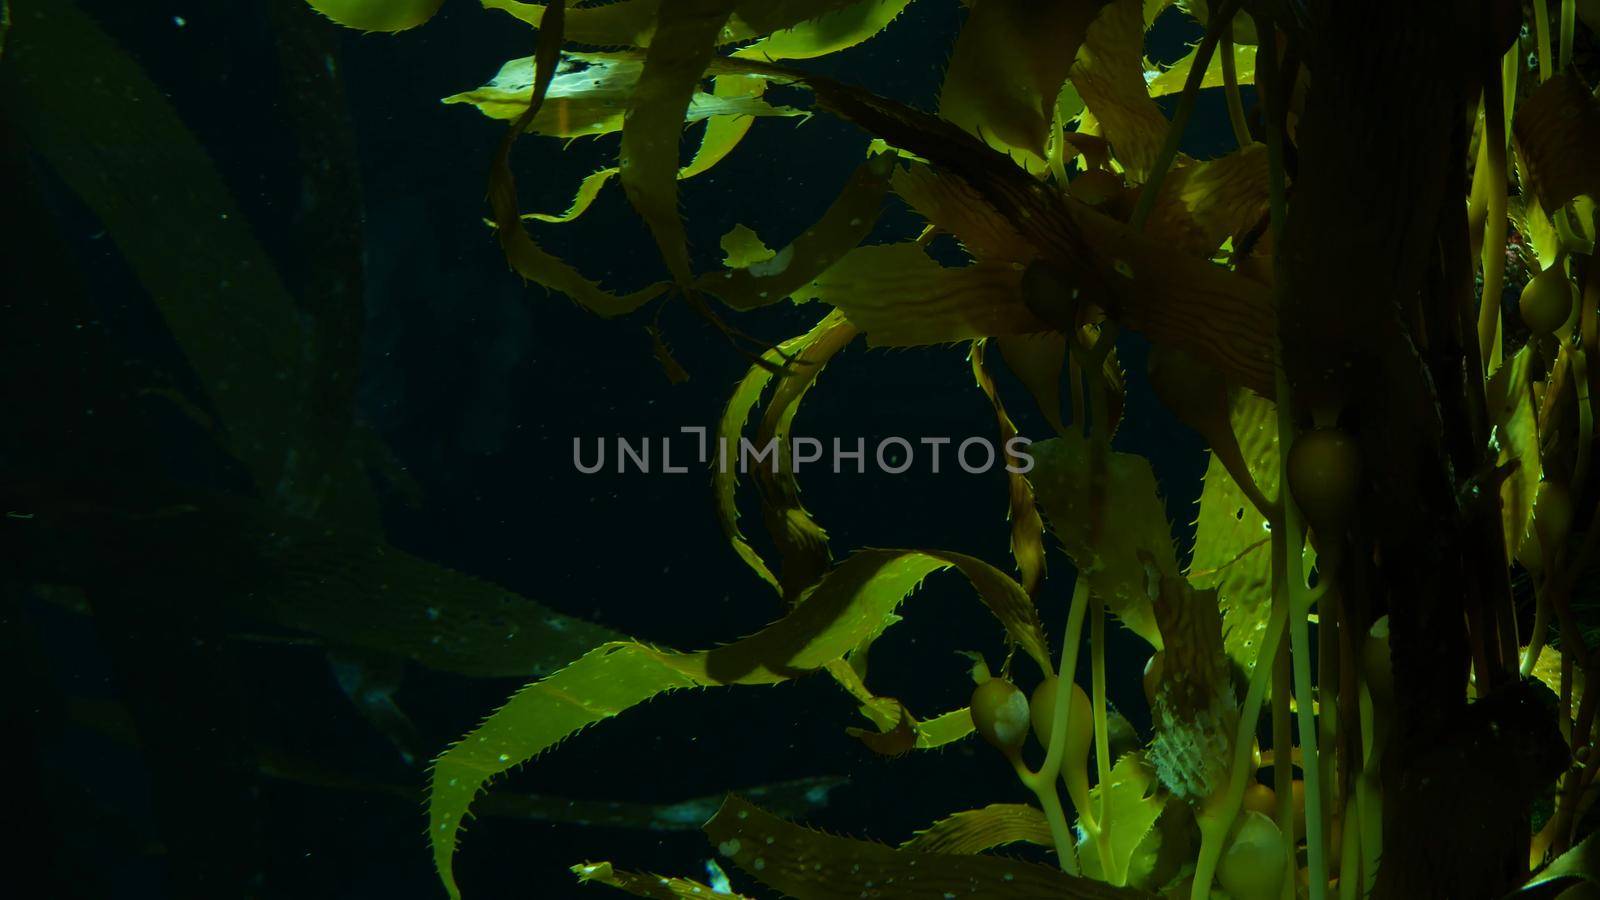 Light rays filter through a Giant Kelp forest. Macrocystis pyrifera. Diving, Aquarium and Marine concept. Underwater close up of swaying Seaweed leaves. Sunlight pierces vibrant exotic Ocean plants by DogoraSun